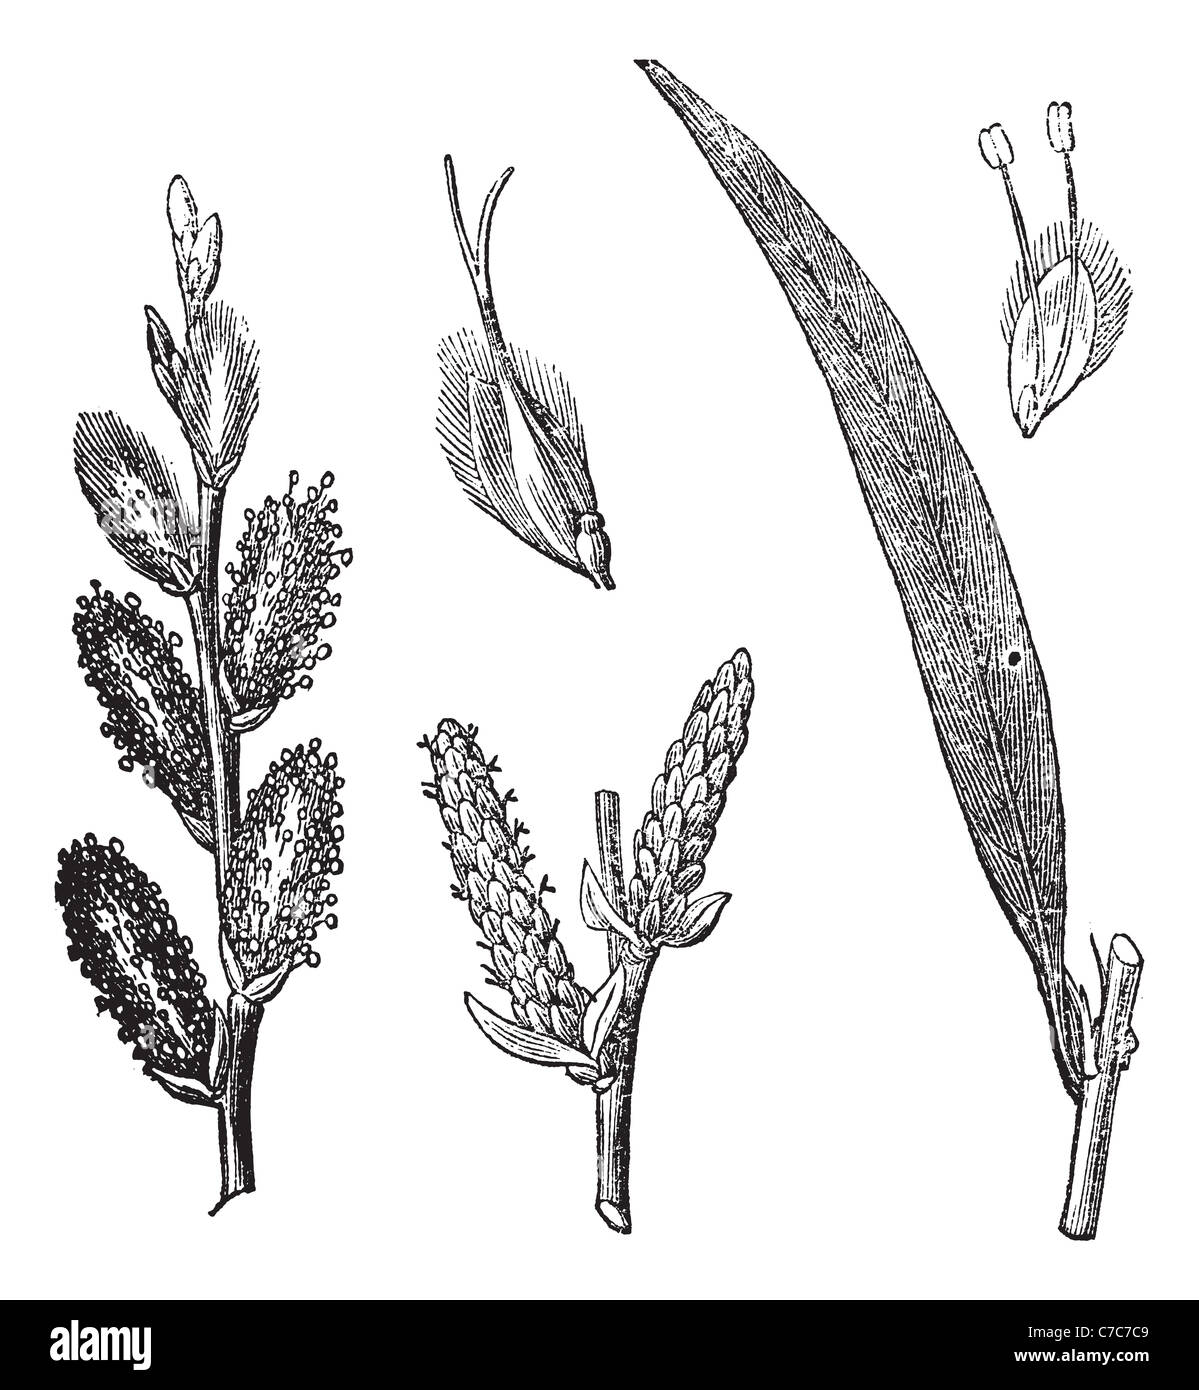 Common Osier, vintage engraving. Old engraved illustration of Common Osier with male and female flowers isolated on a white. Stock Photo